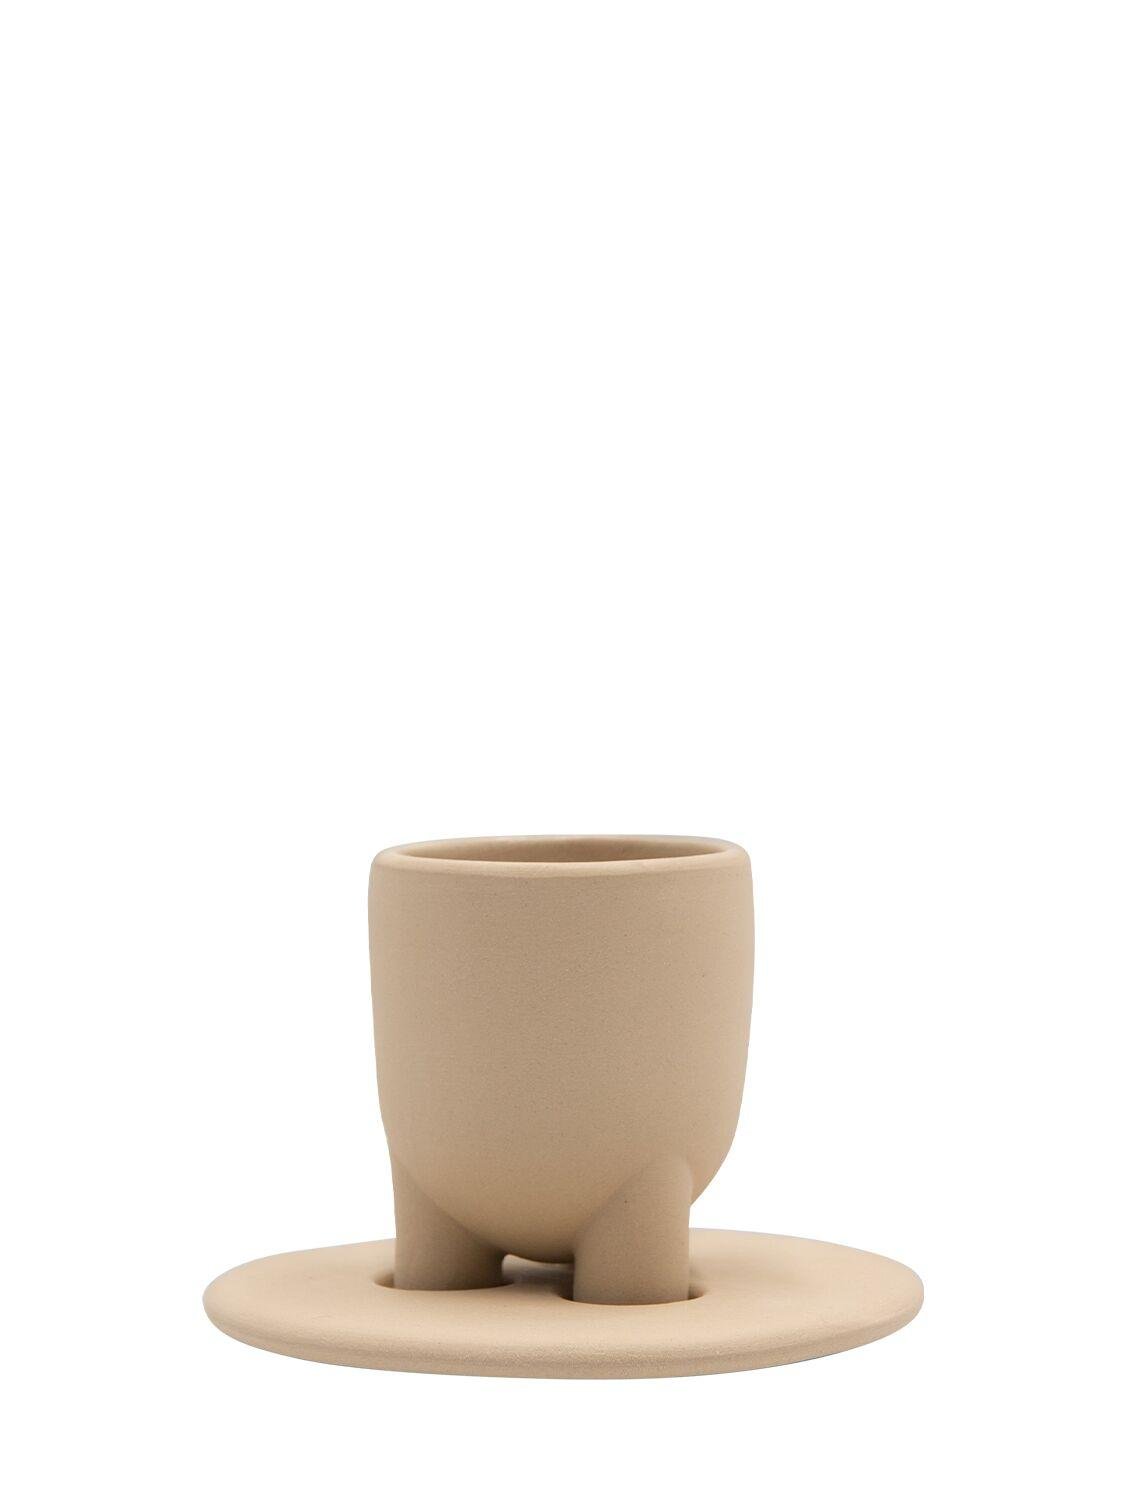 Stoneware Cup & Saucer by BURGIO.